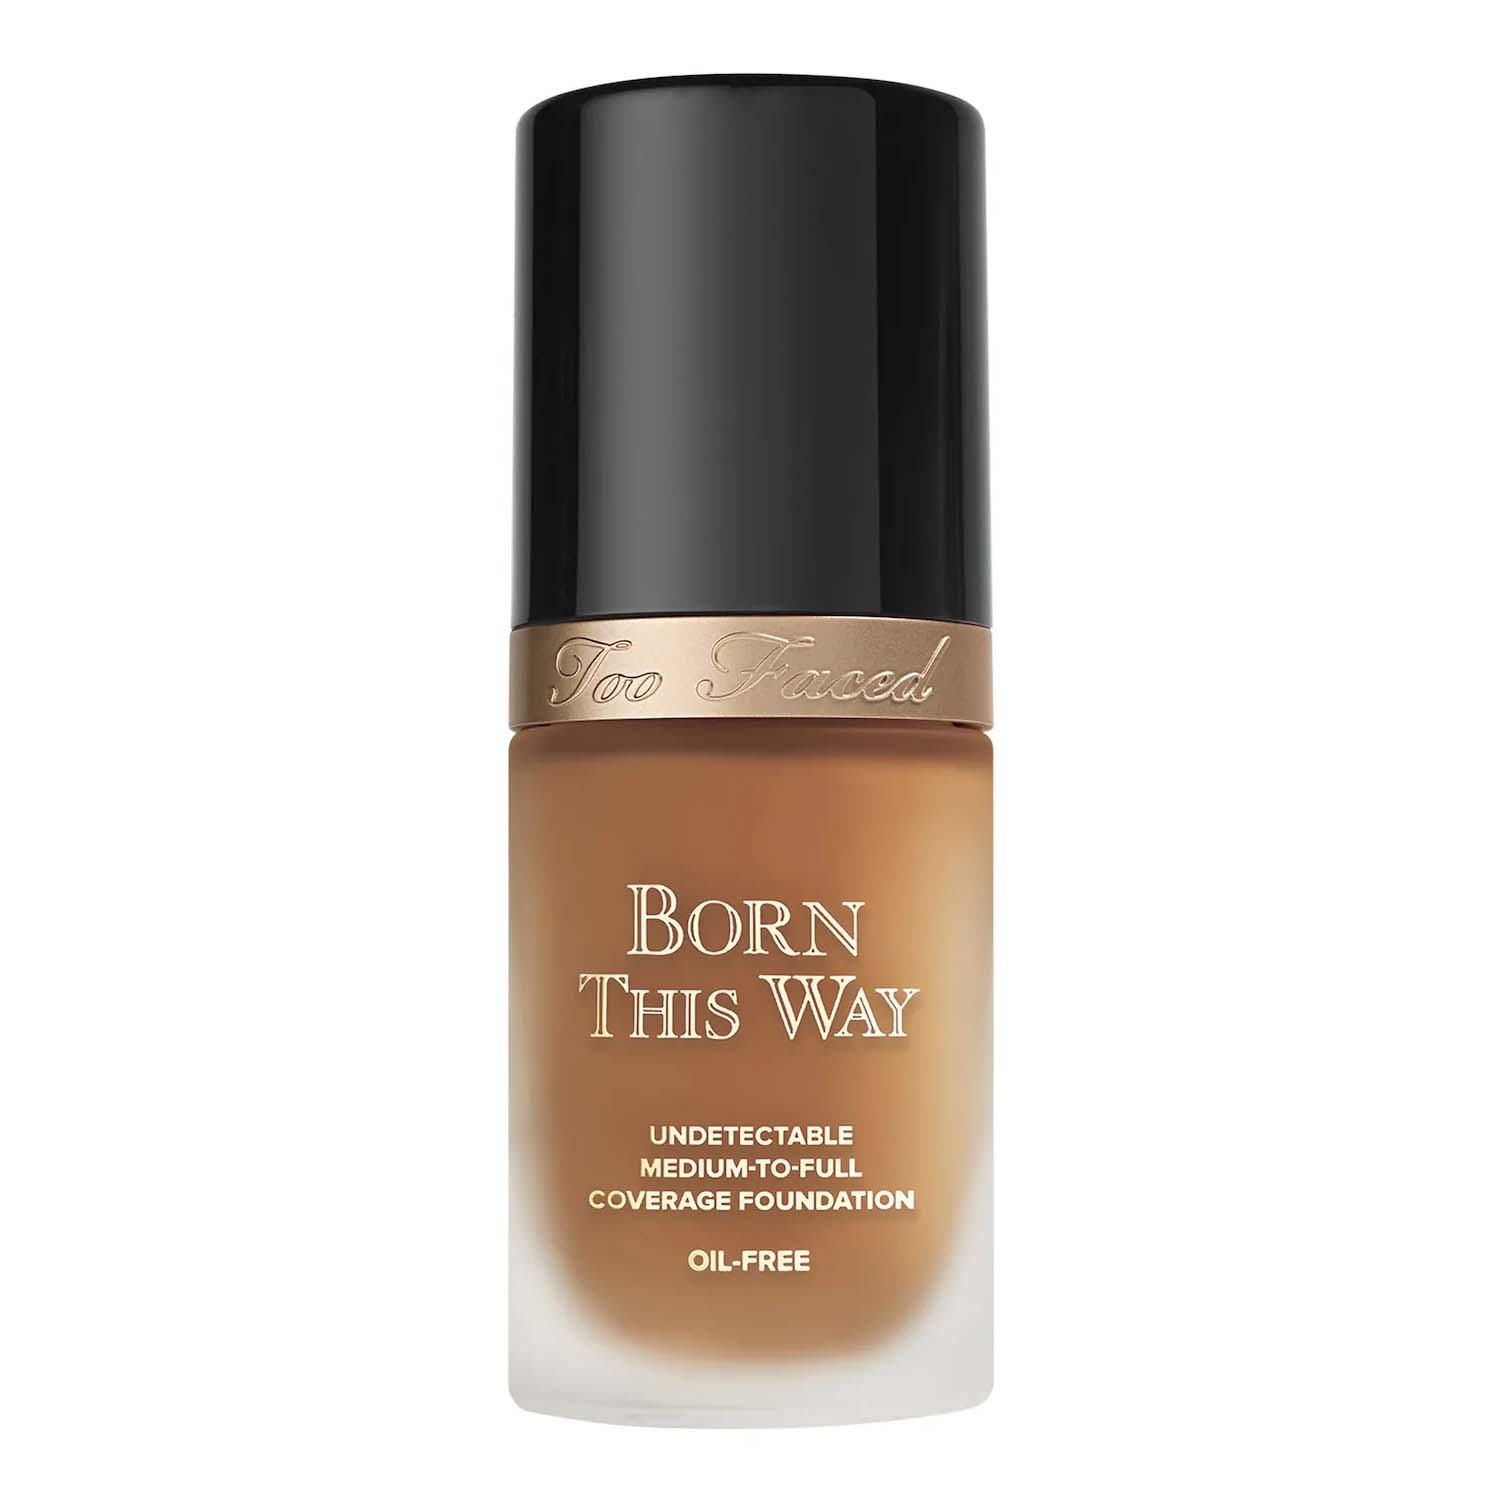 Too Faced Born This Way Natural Finish Longwear Liquid Foundation in the shade rich tan